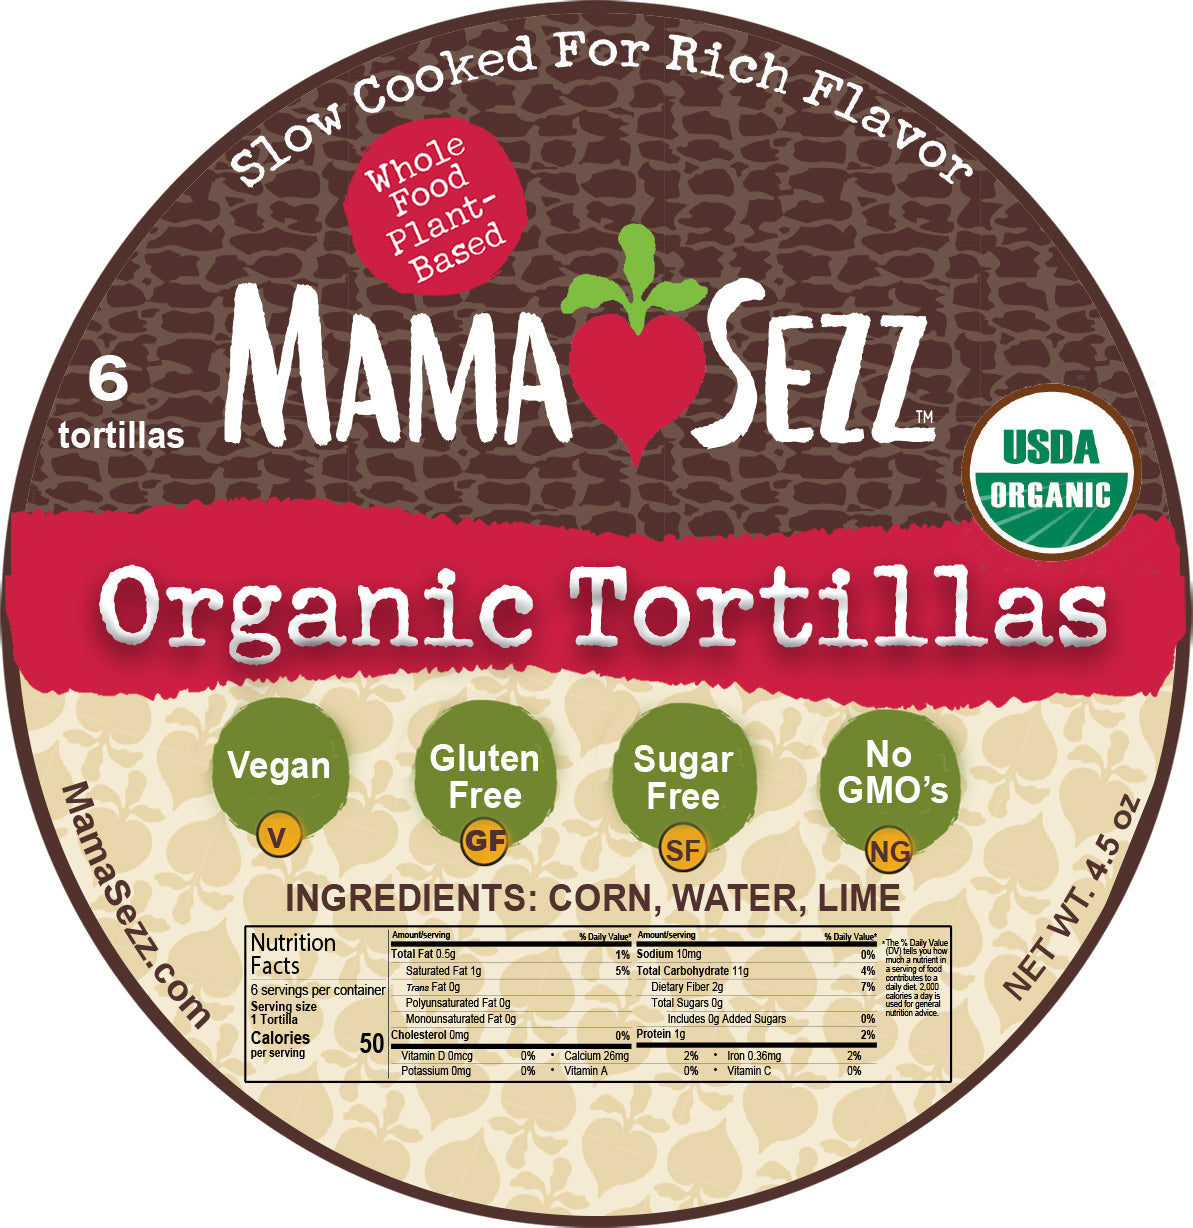 Mamasezz organic tortillas delivered